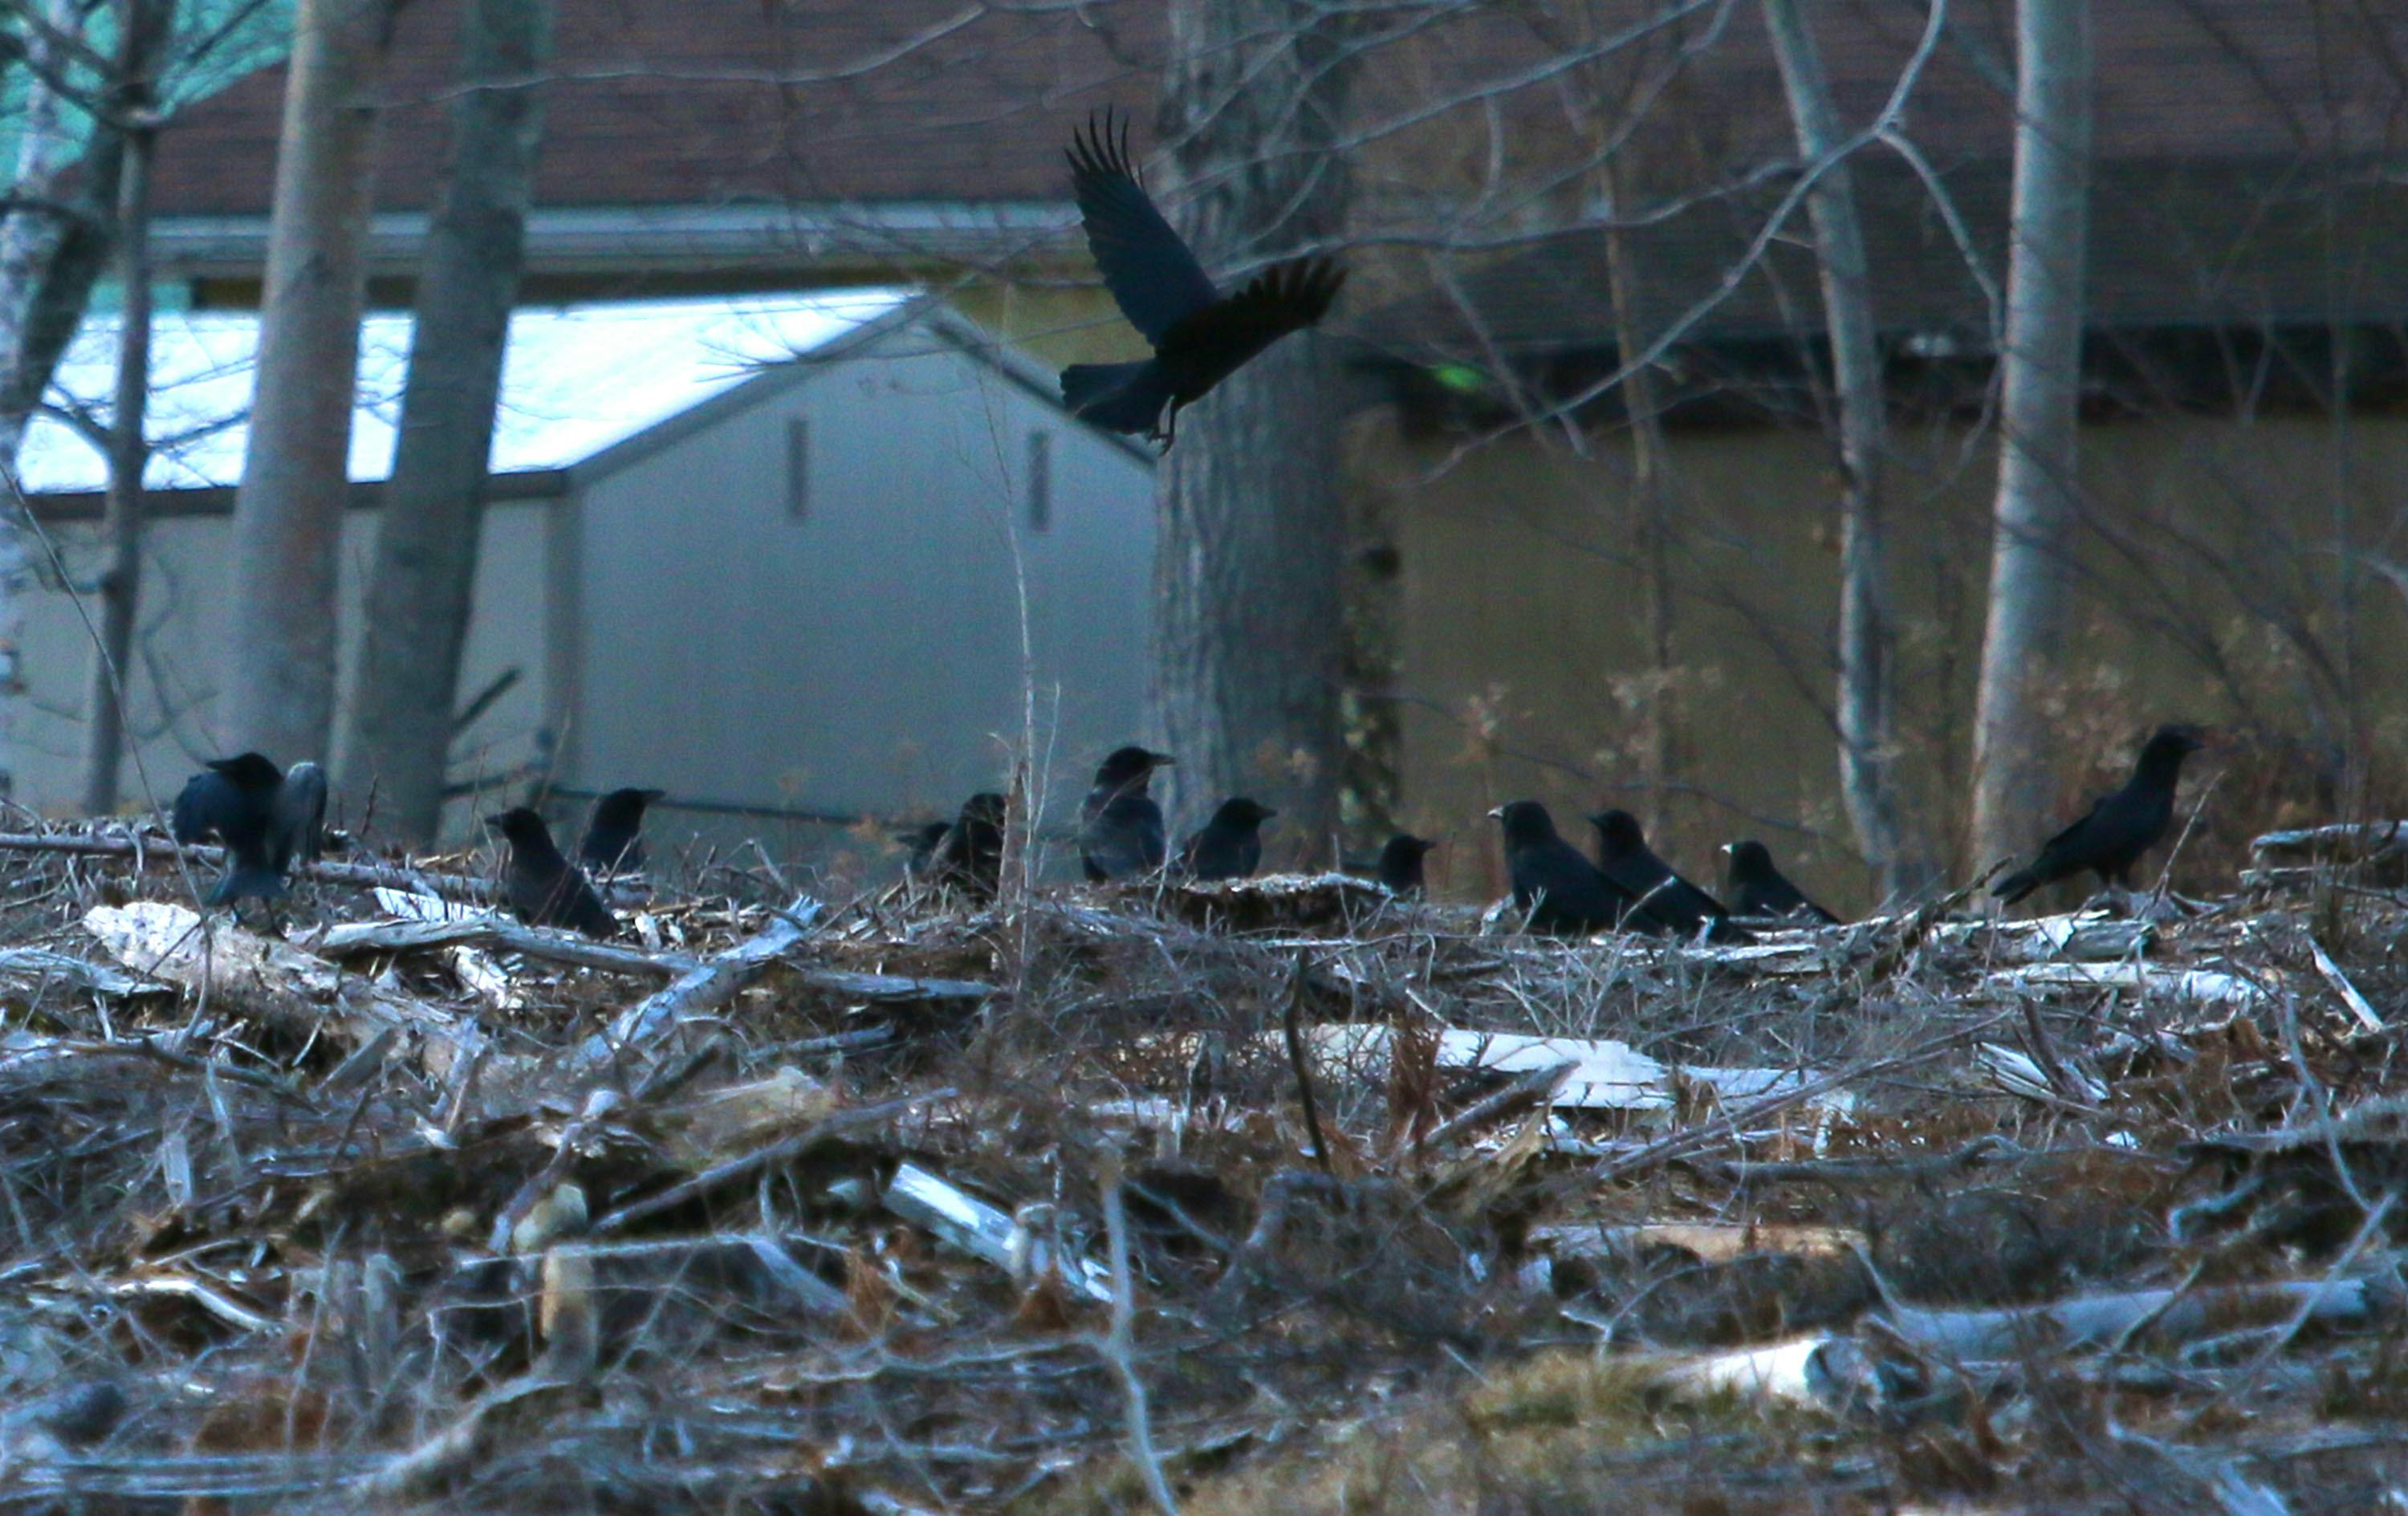 Crows gather on a small deforested area behind Mount Saint Vincent University in Halifax on Thursday, Jan. 2, 2020.